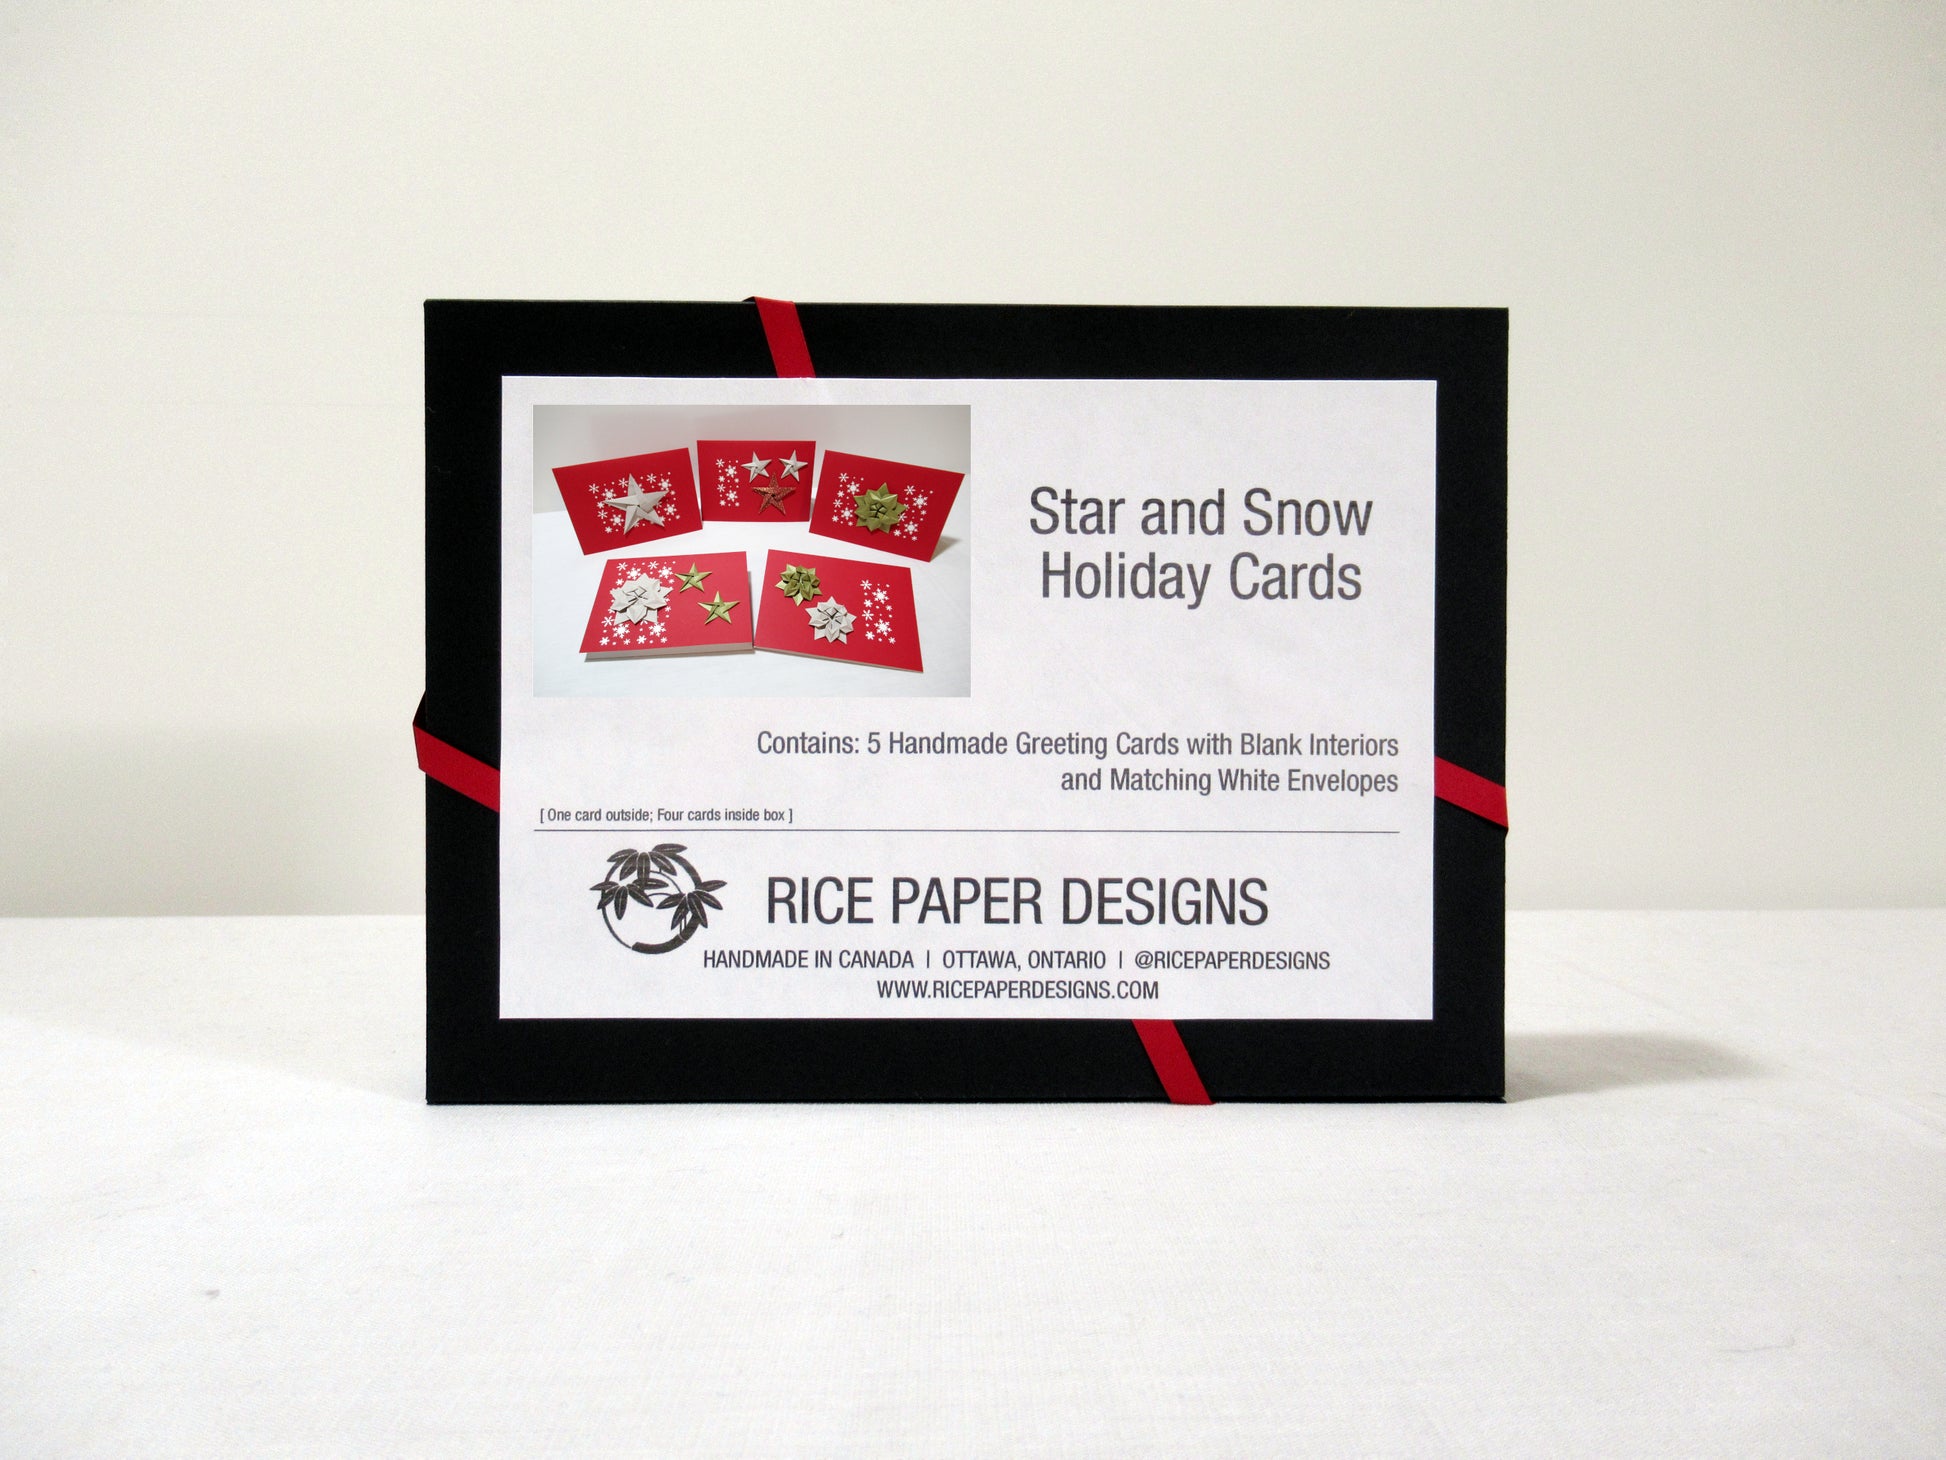 The back of a black box showing a label for a collection of Star and Snow Holiday Cards with product information and the Rice Paper Designs logo.